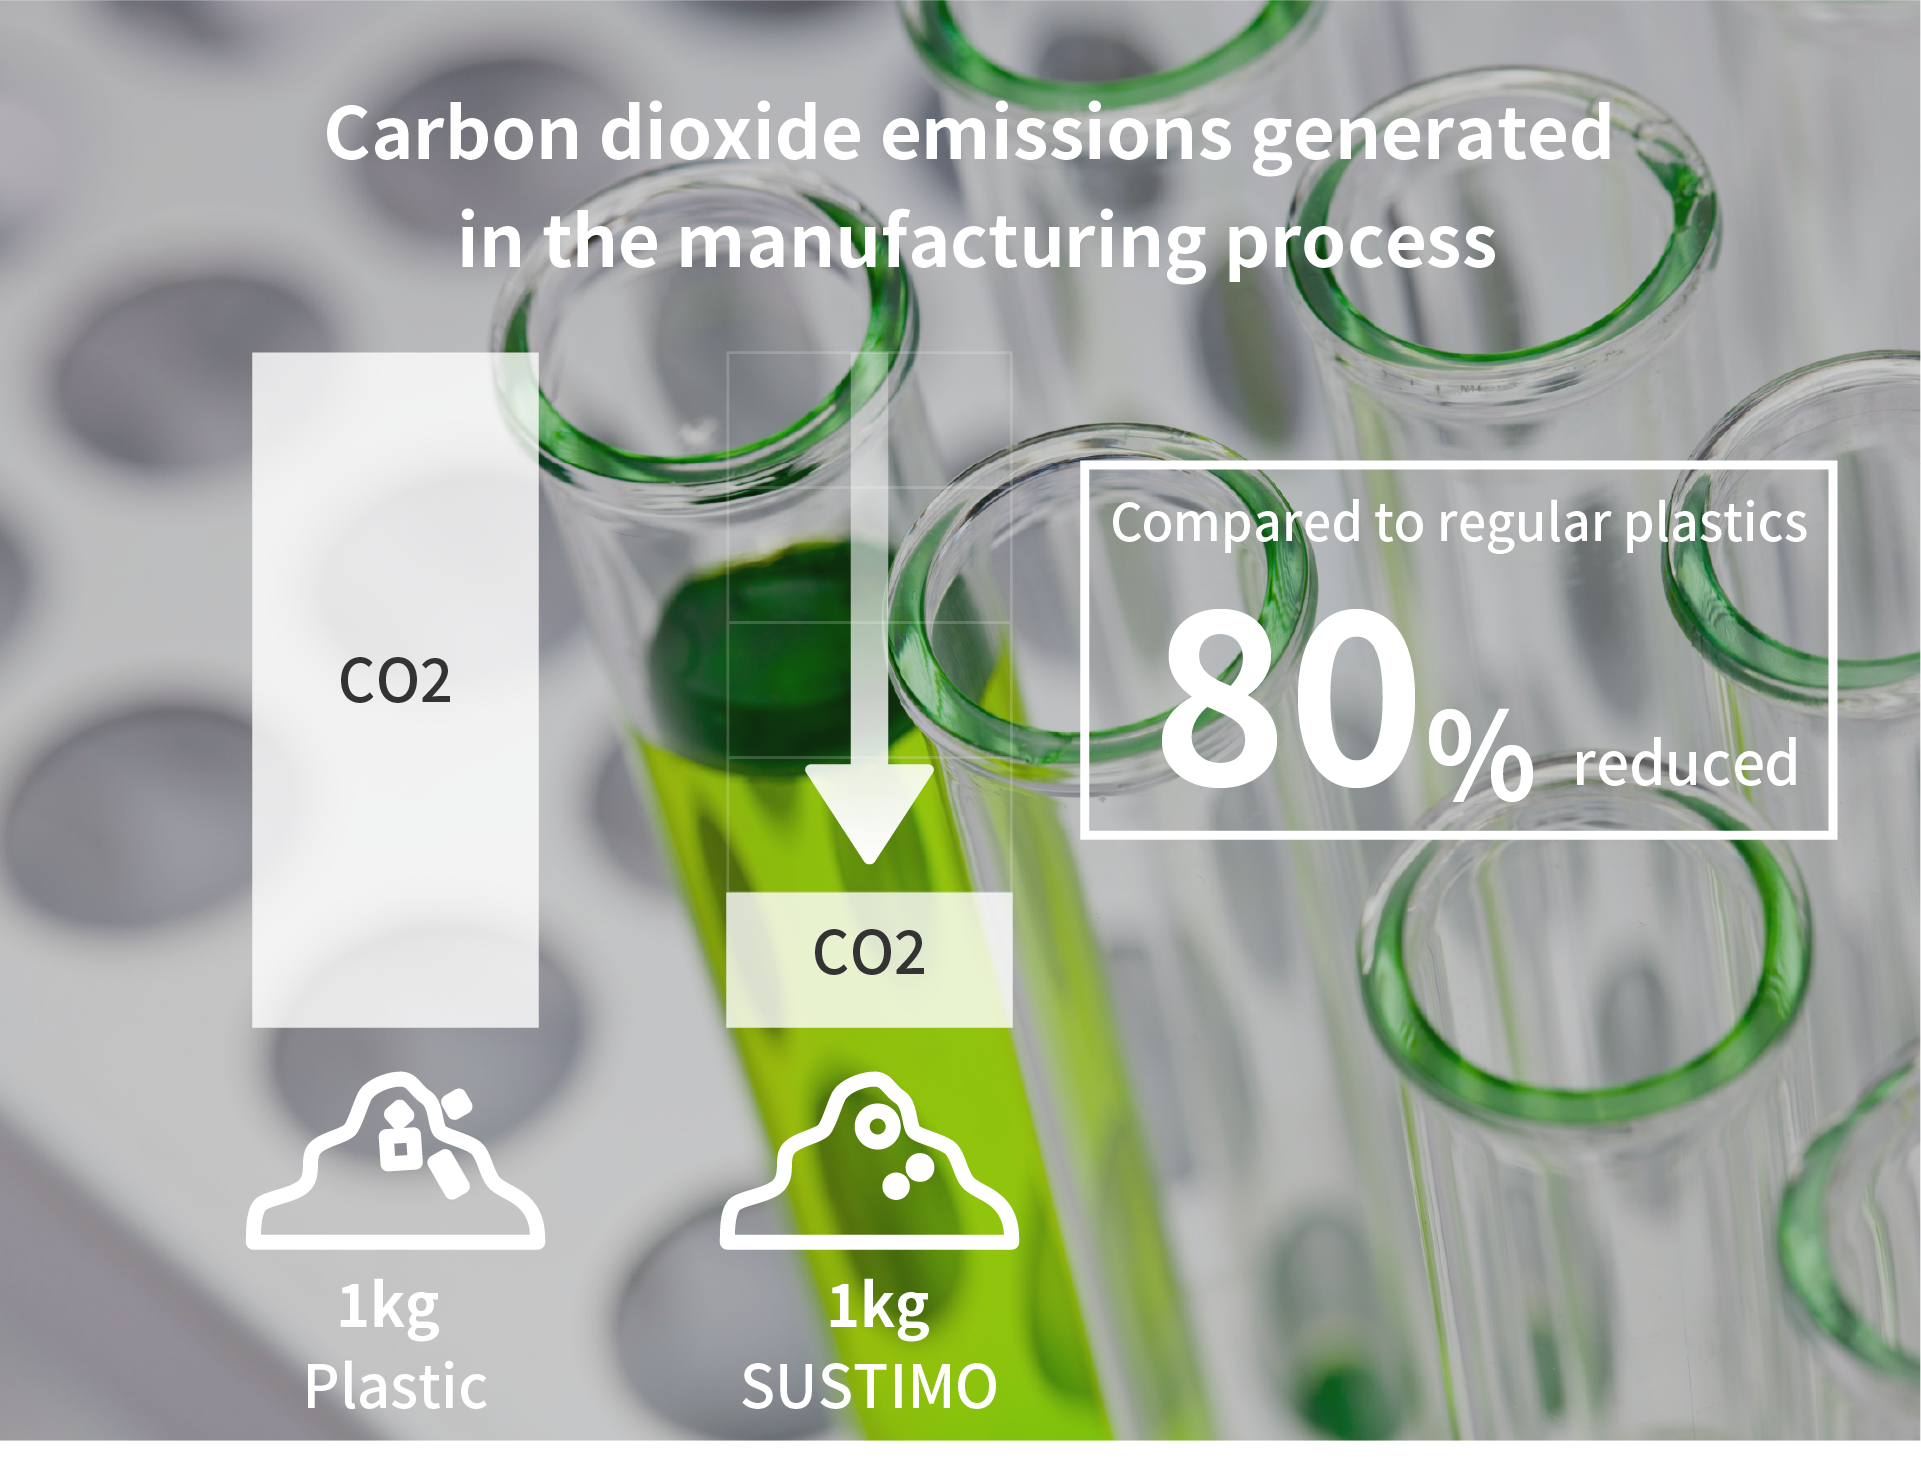 Carbon dioxide emissions generated in the manufacturing process